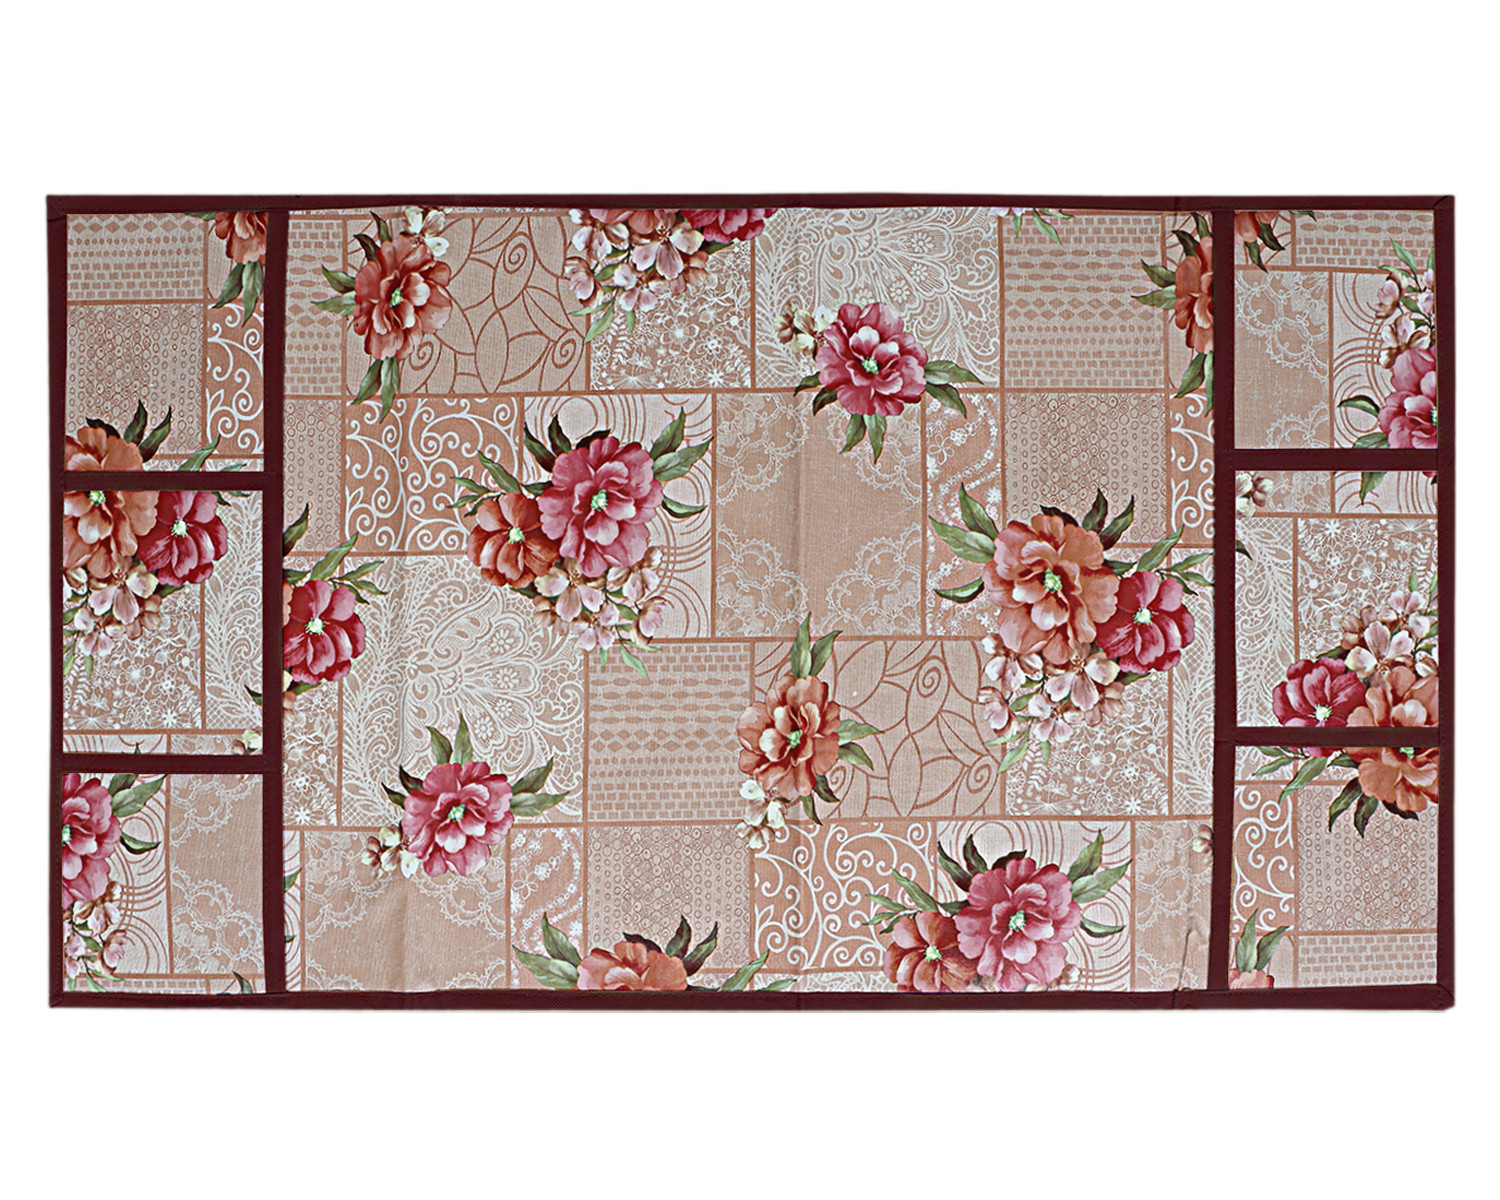 Kuber Industries Flower Printed PVC Fridge Top Cover, Protect For Scratches, Wear & Tear And Dust With 6 Utility Side Pockets (Peach)